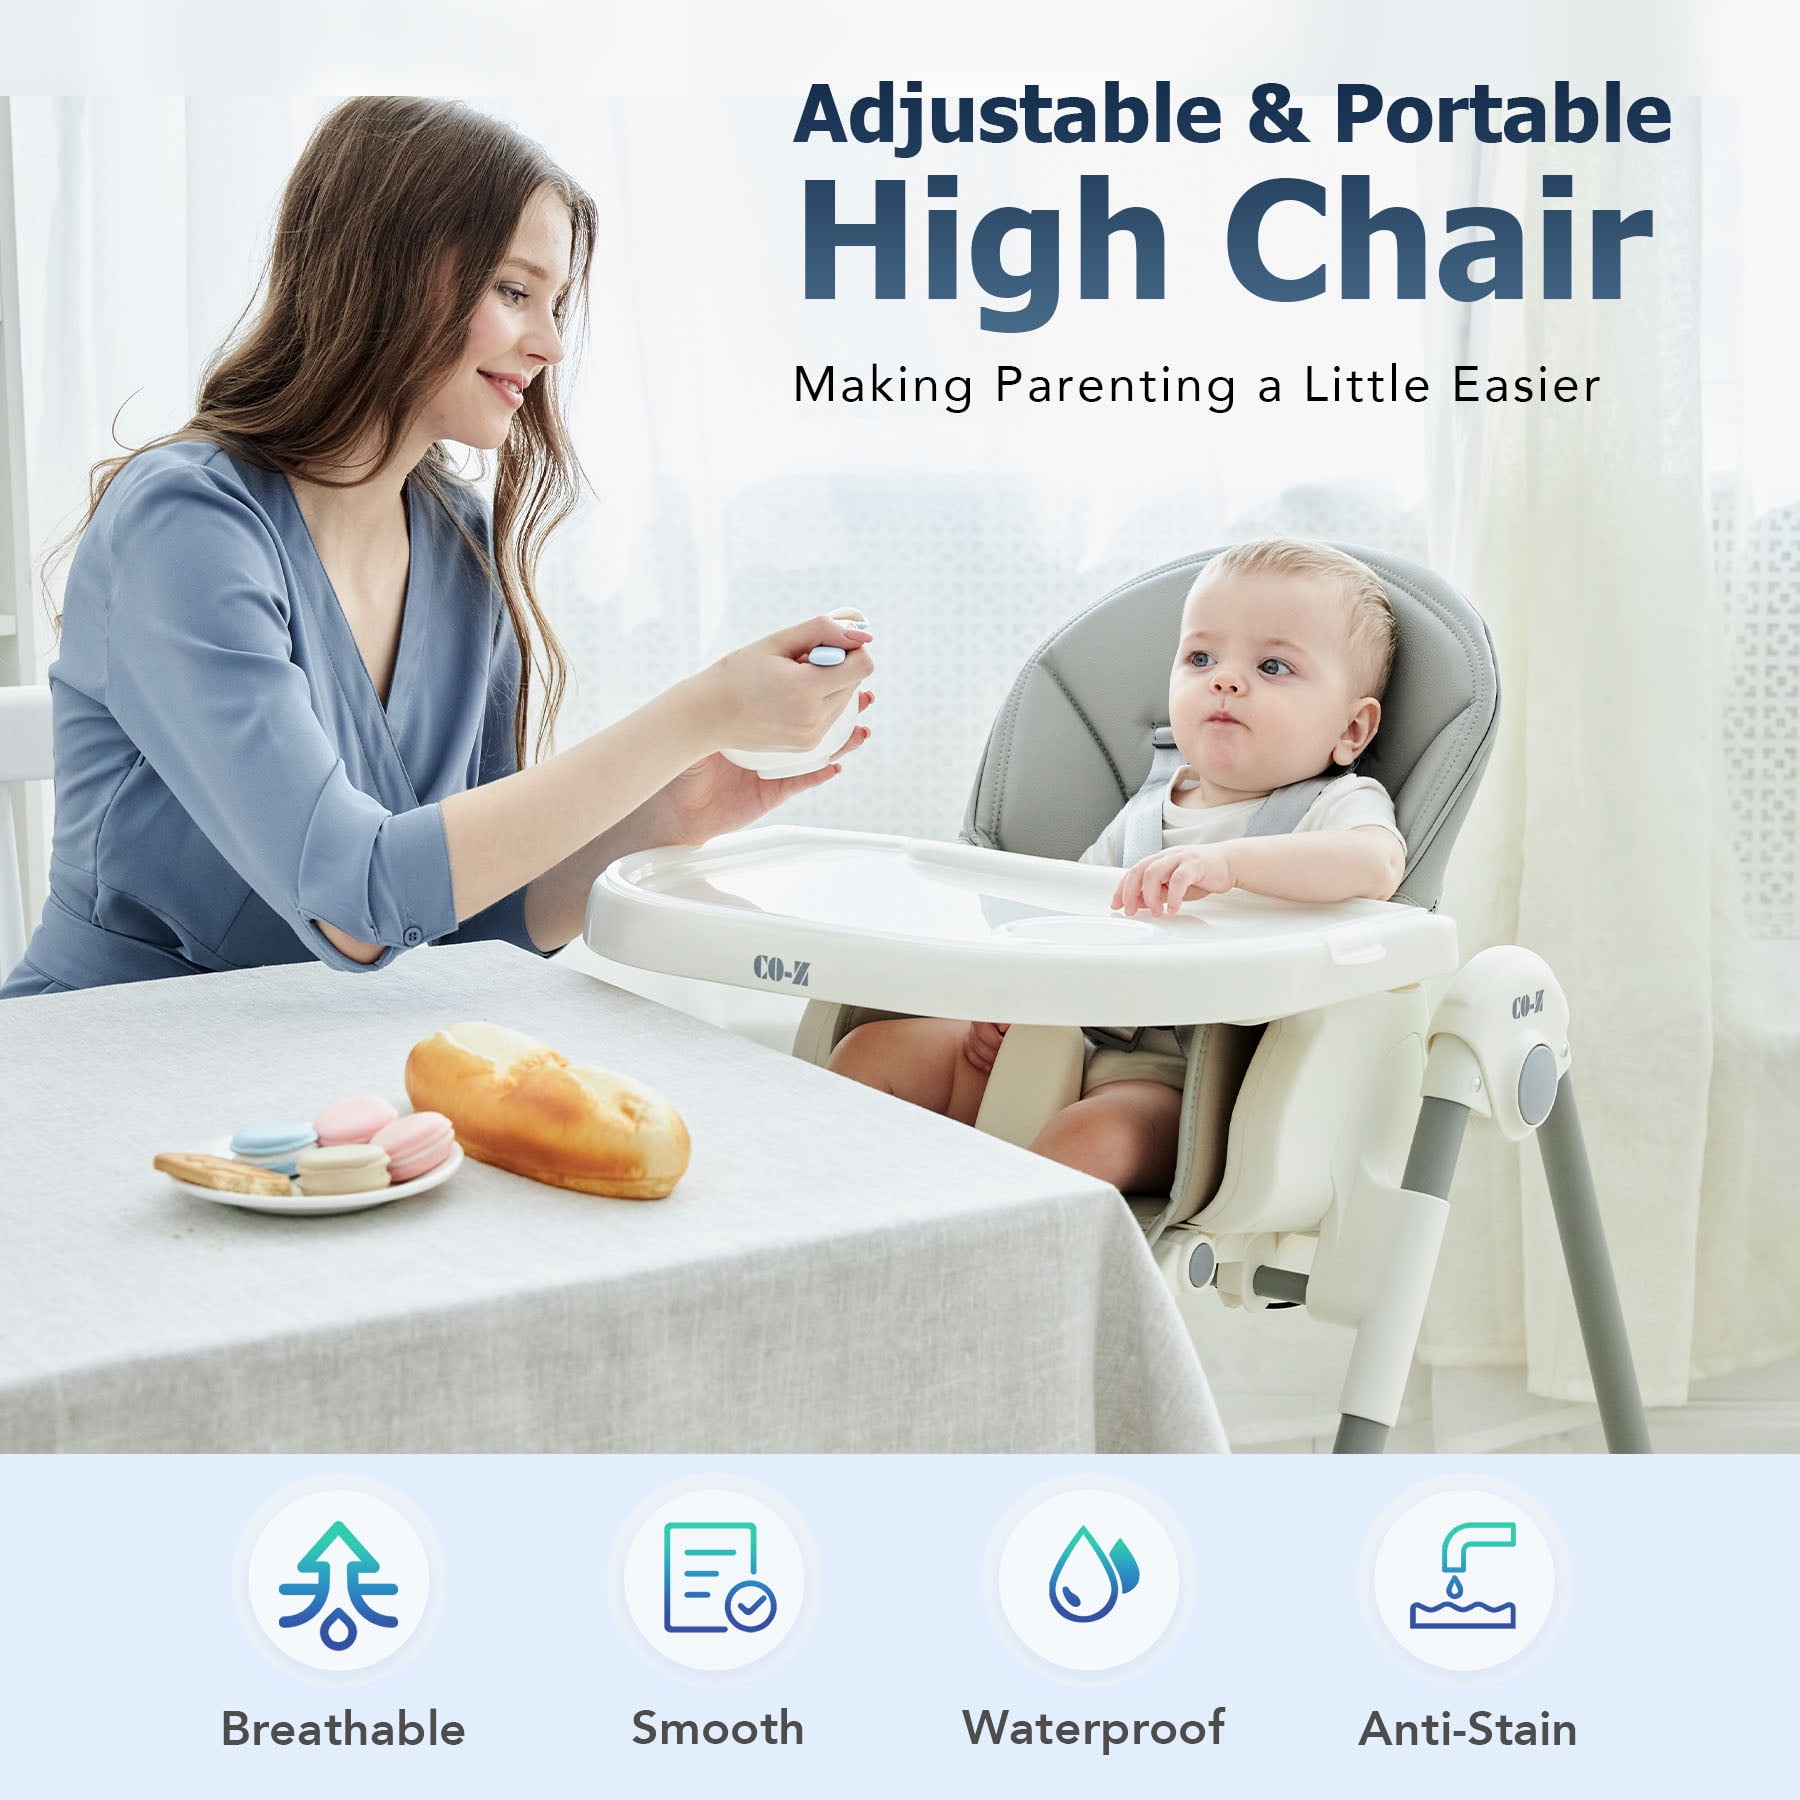 Foldable & Portable Height Chair for Toddlers Blue Adjustable Little Bosses R Us Foldable Baby High Chair Seat with Footrest